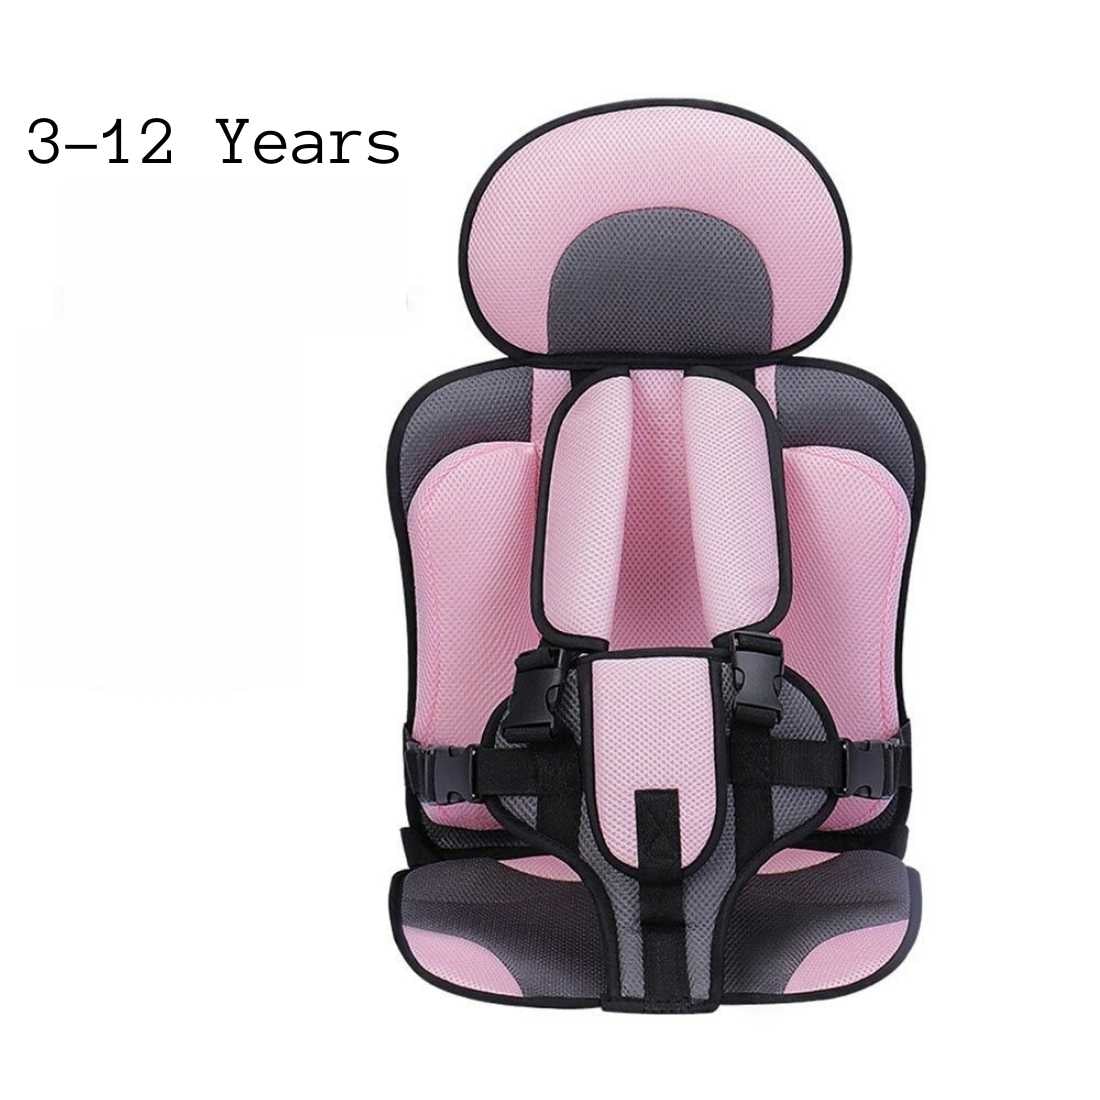 Car Seat Safety/Protection Mat for Children 6 Months to 12 Years Old - Pink & Blue Baby Shop - Review